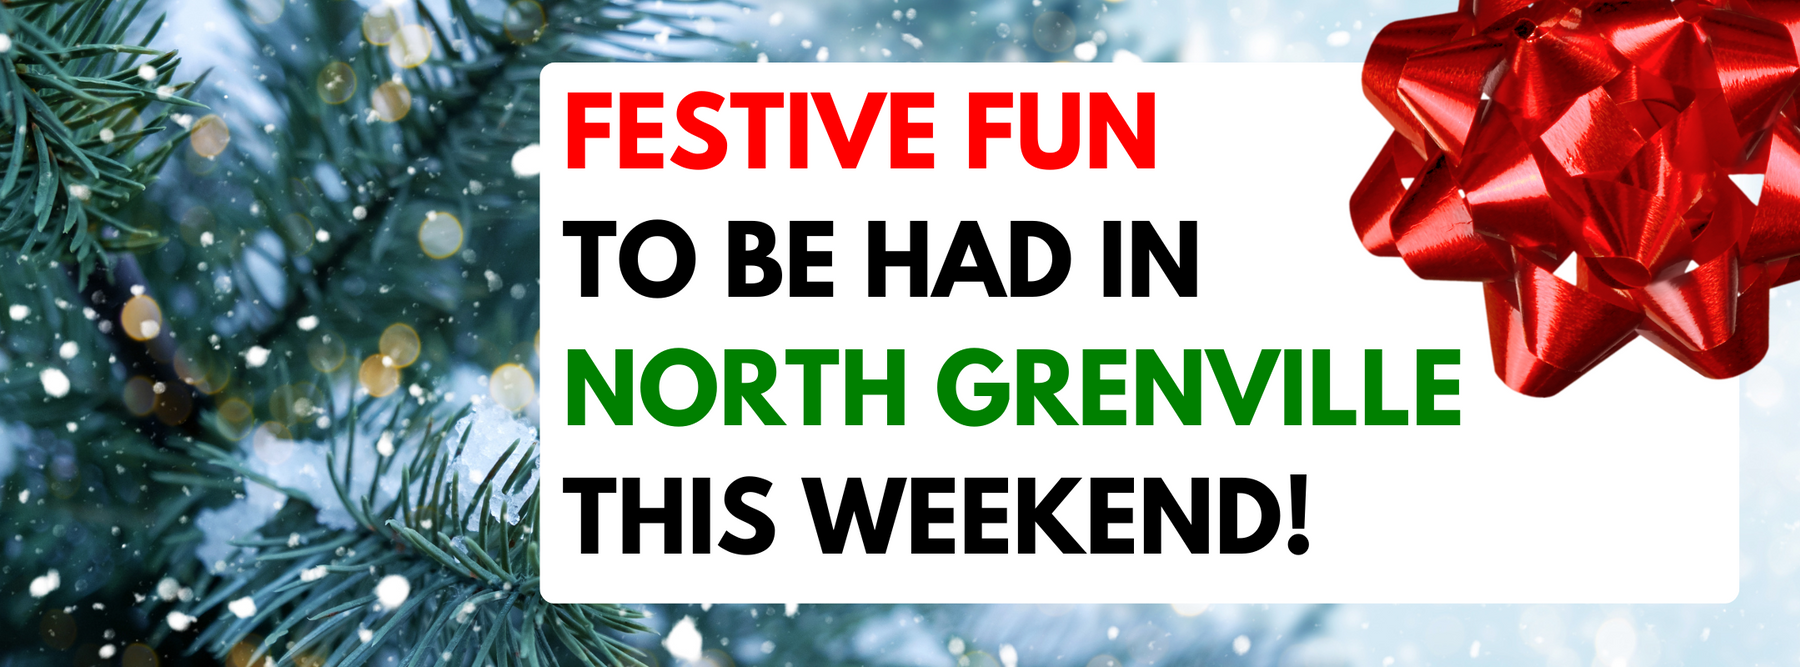 8+ Things Happening this weekend in North Grenville, ON